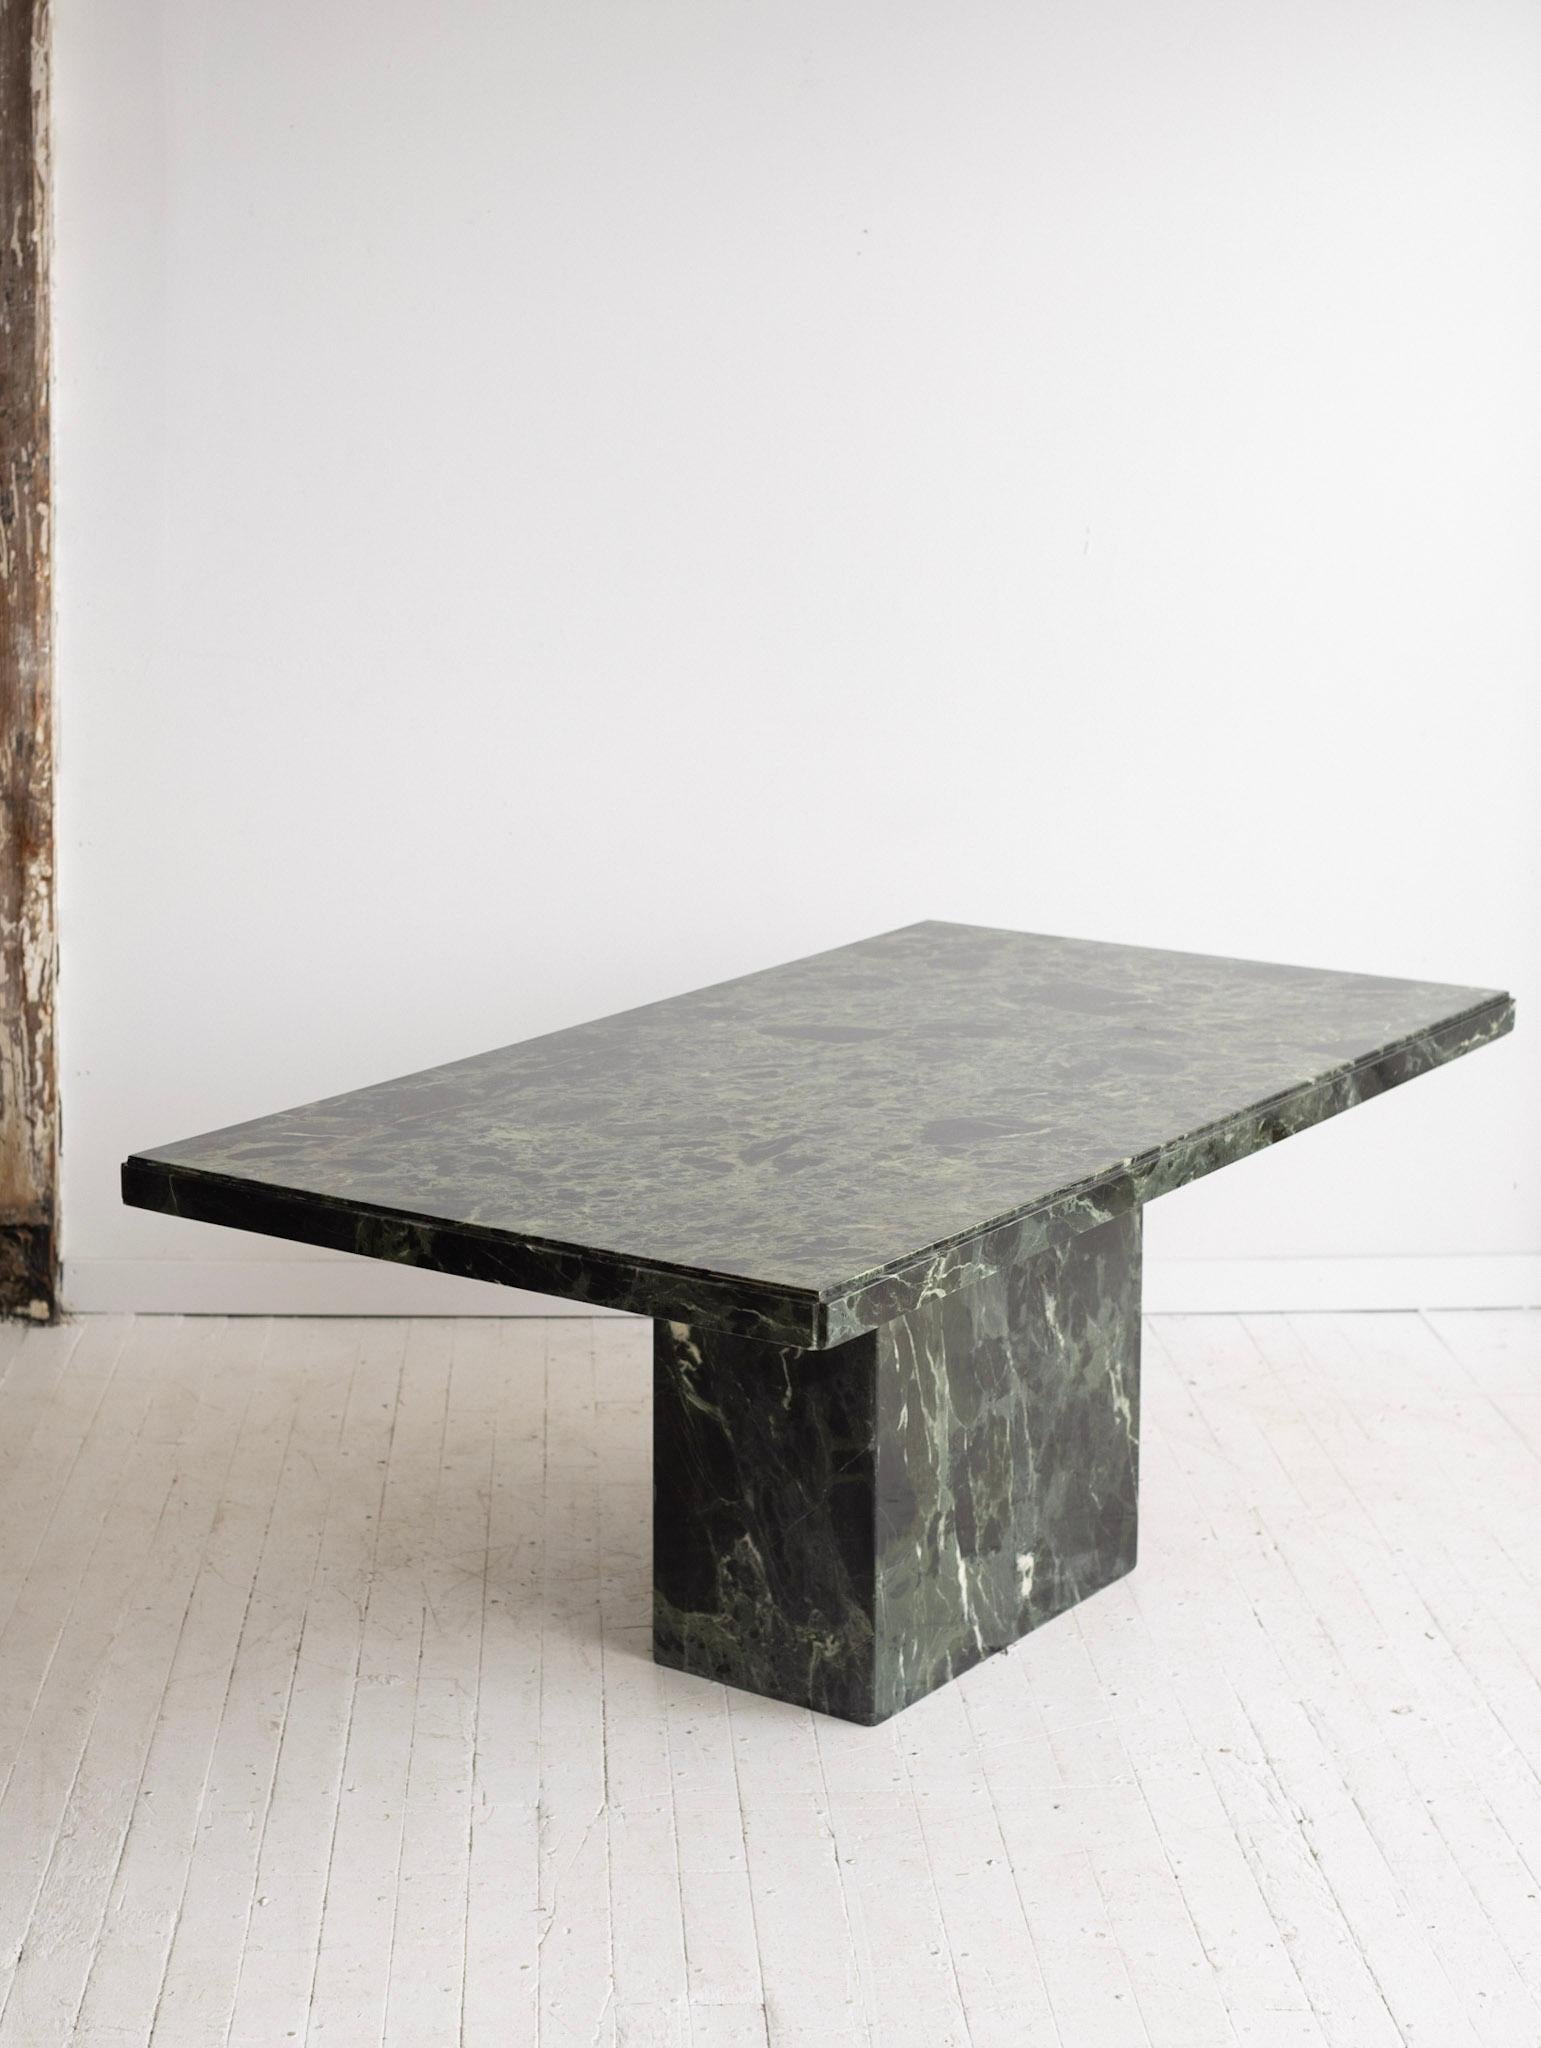 Italian green marble dining table. Solid marble top rests upon hollow marble pedestal base. A very heavy piece overall. Comfortably seats 4 to 6 people.